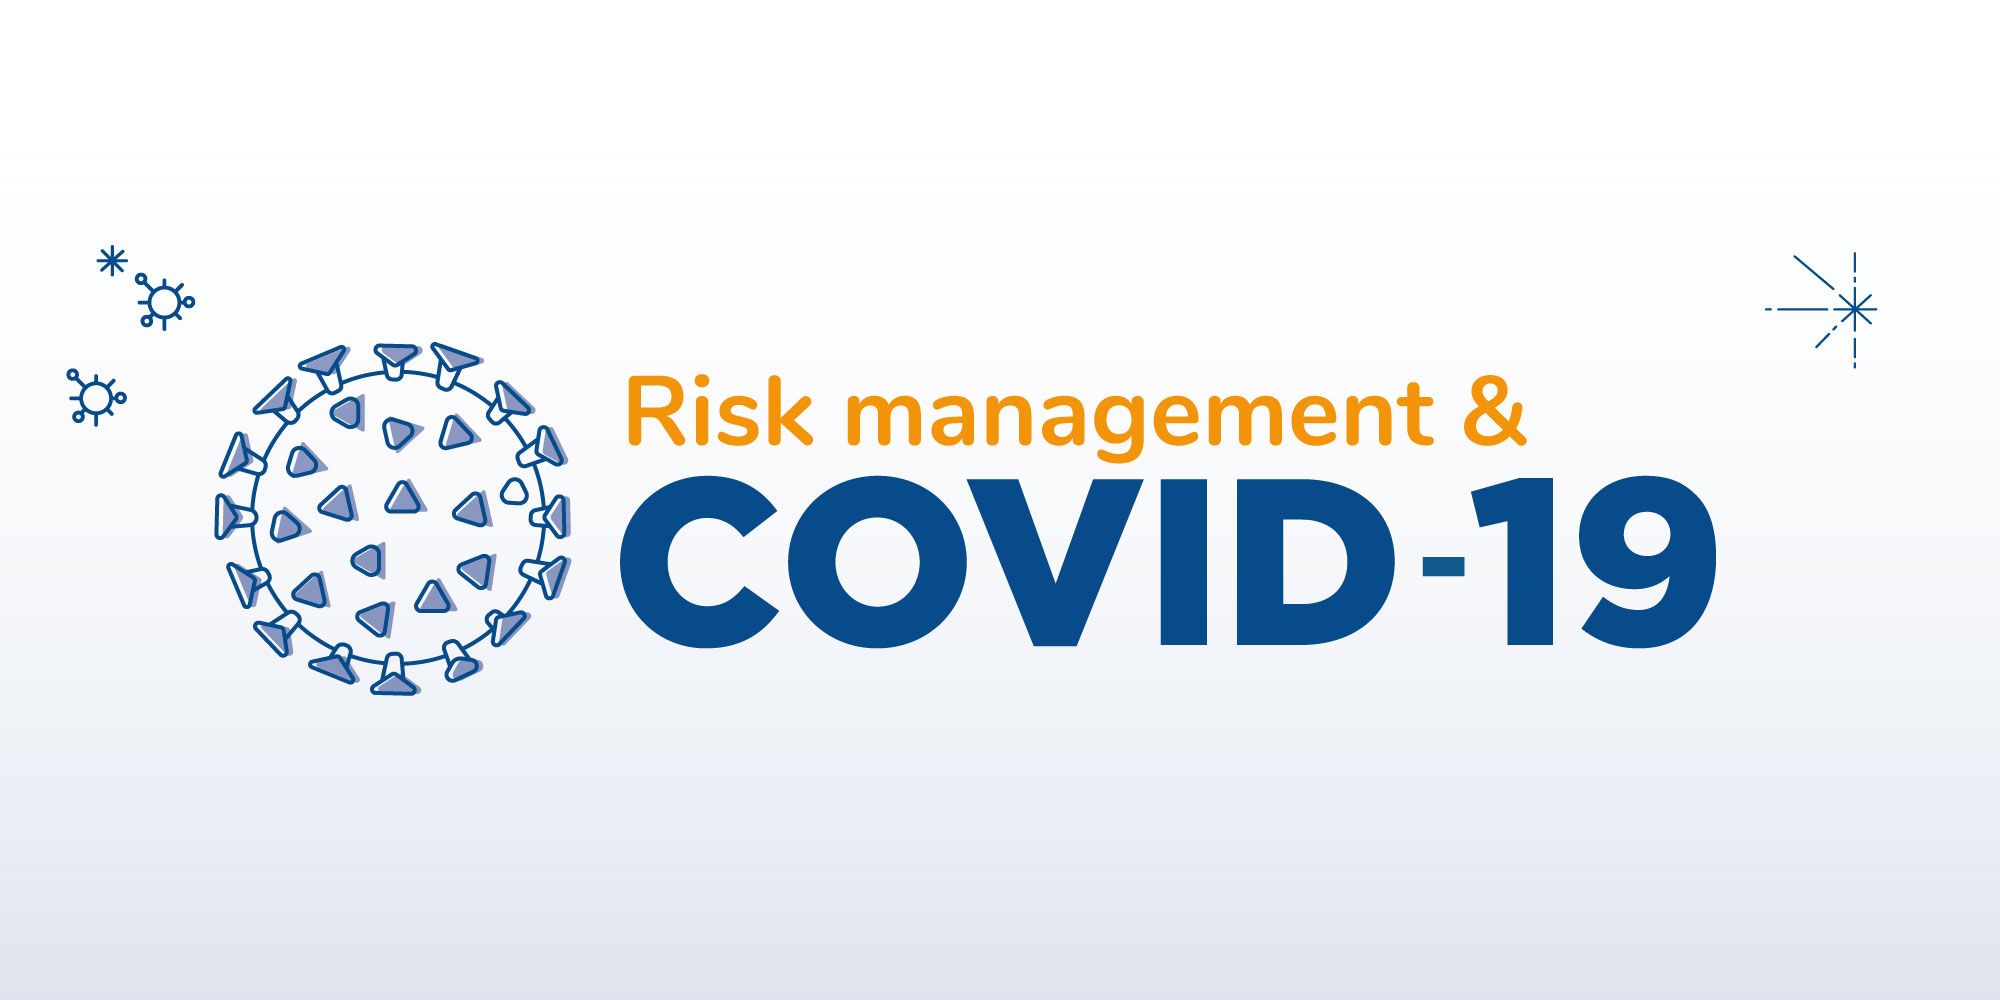 Risk management and Covid-19